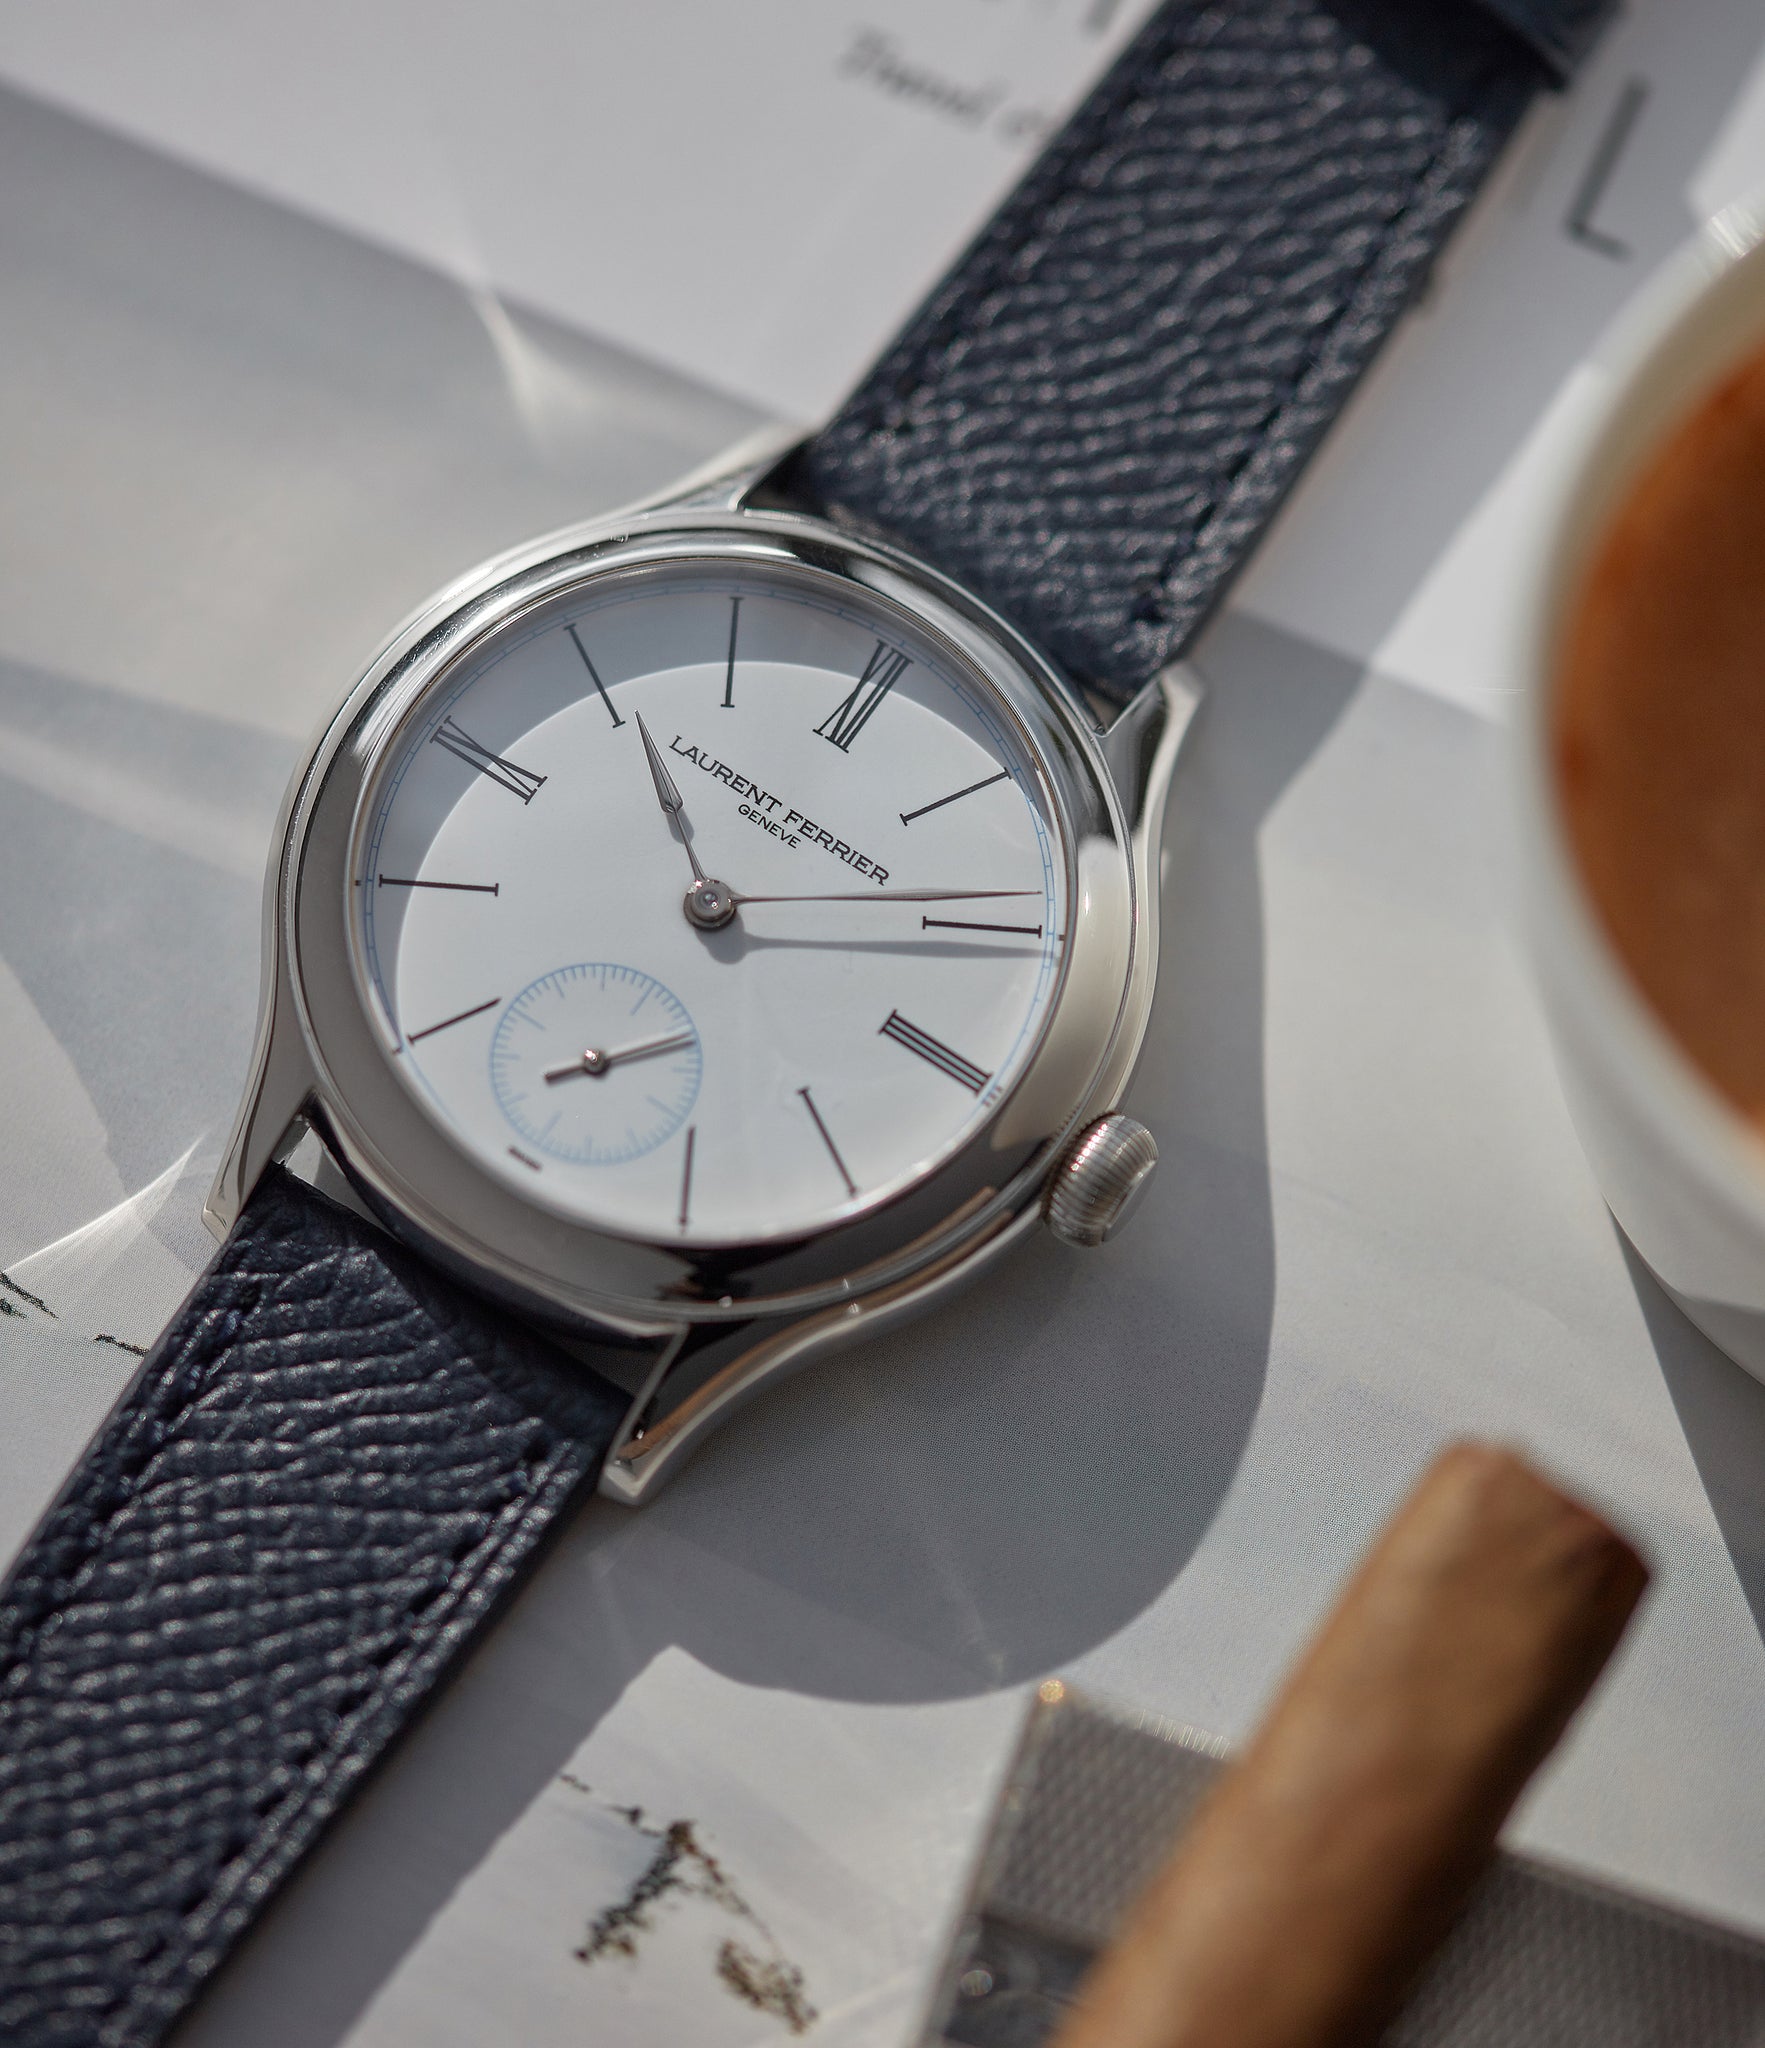 Limited Edition Laurent Ferrier Galet Micro-rotor platinum white enamel dial dress watch sale A Collected Man London UK specialist of independent watchmakers